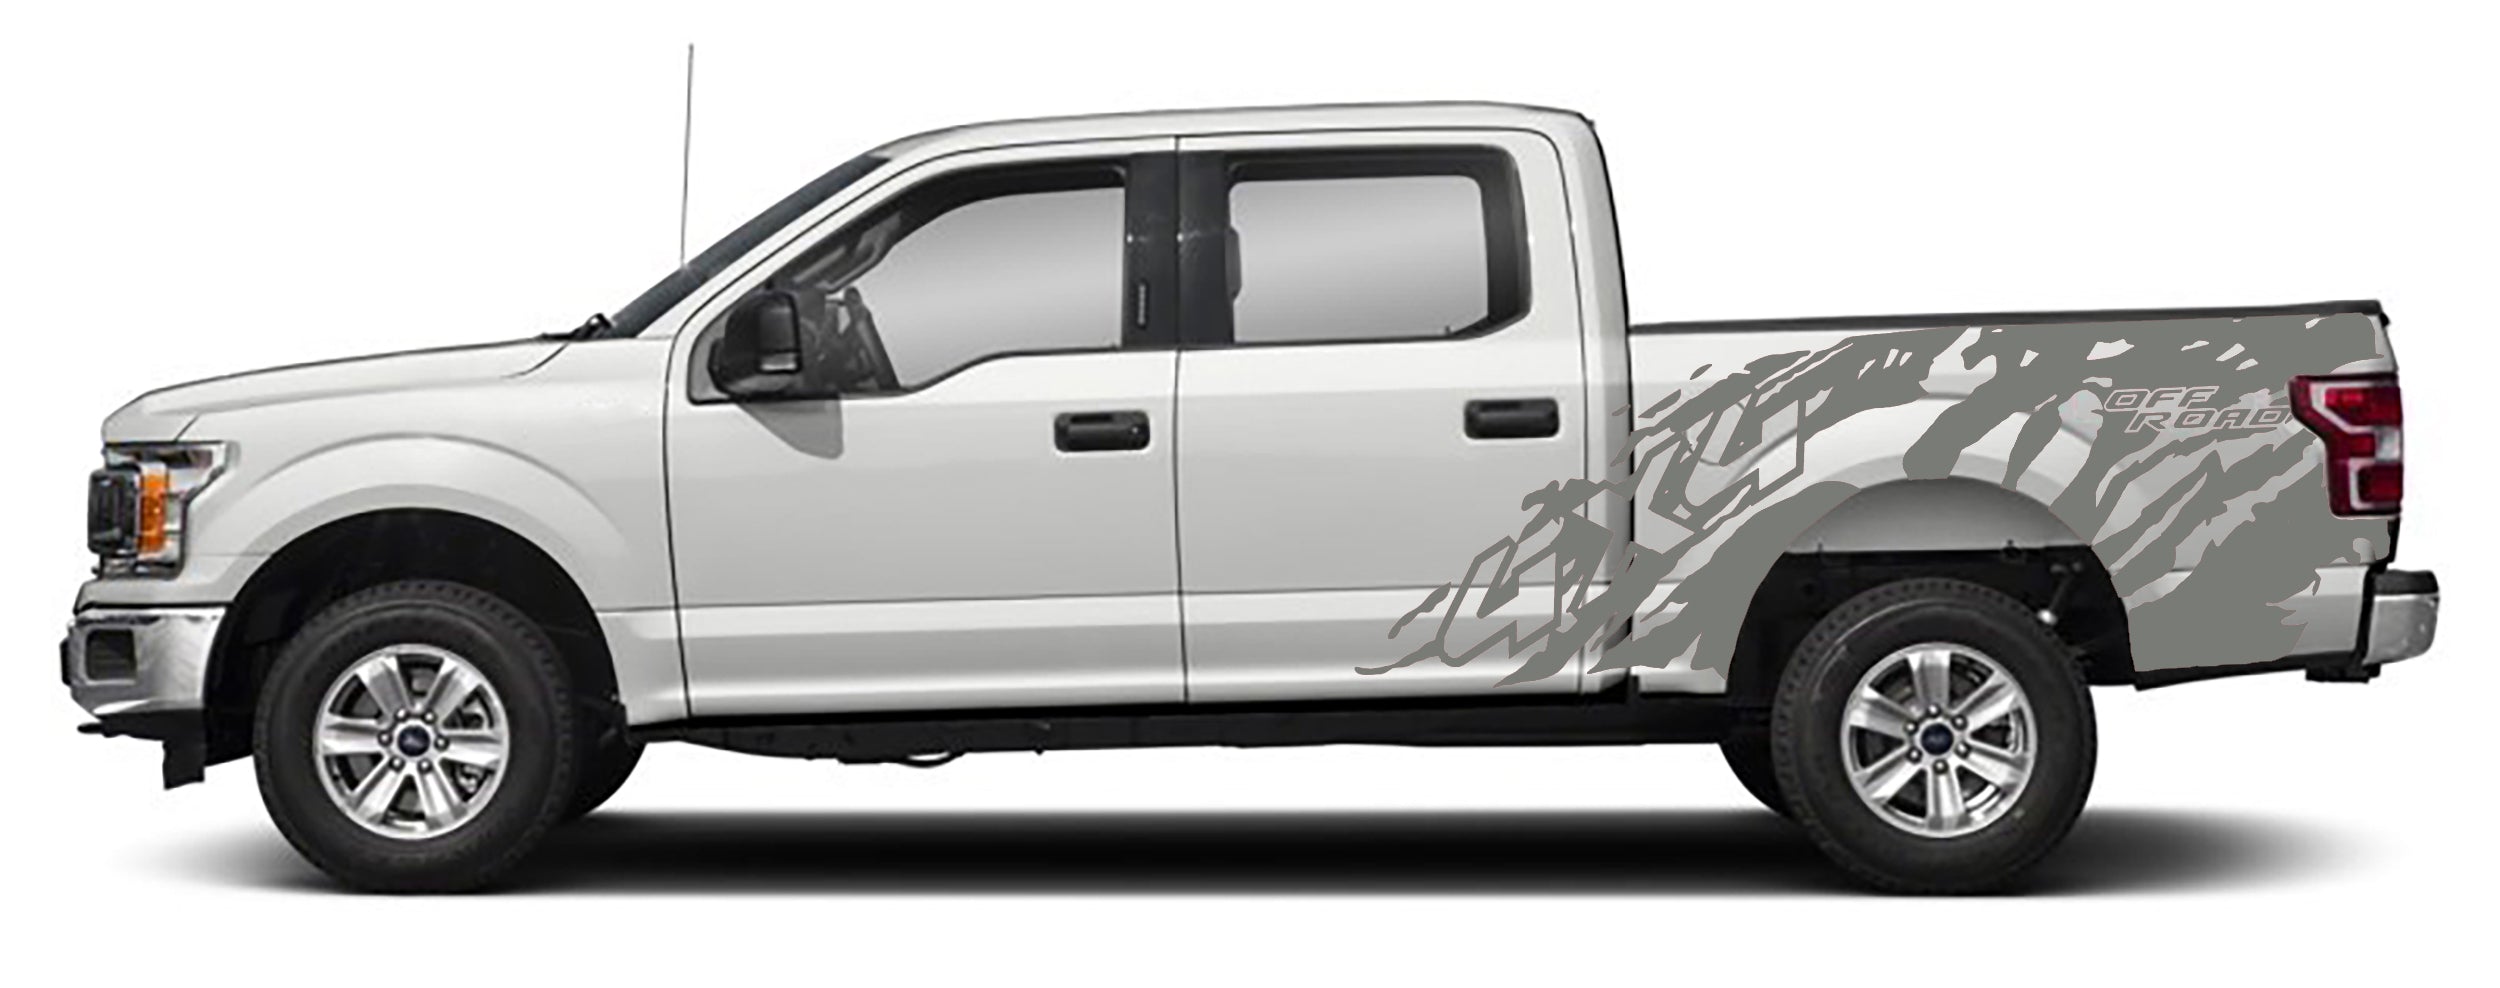 Ford F-150 4x4 Off Road Bed Decals (Pair) : Vinyl Graphics Kit Fits (2015-2020)